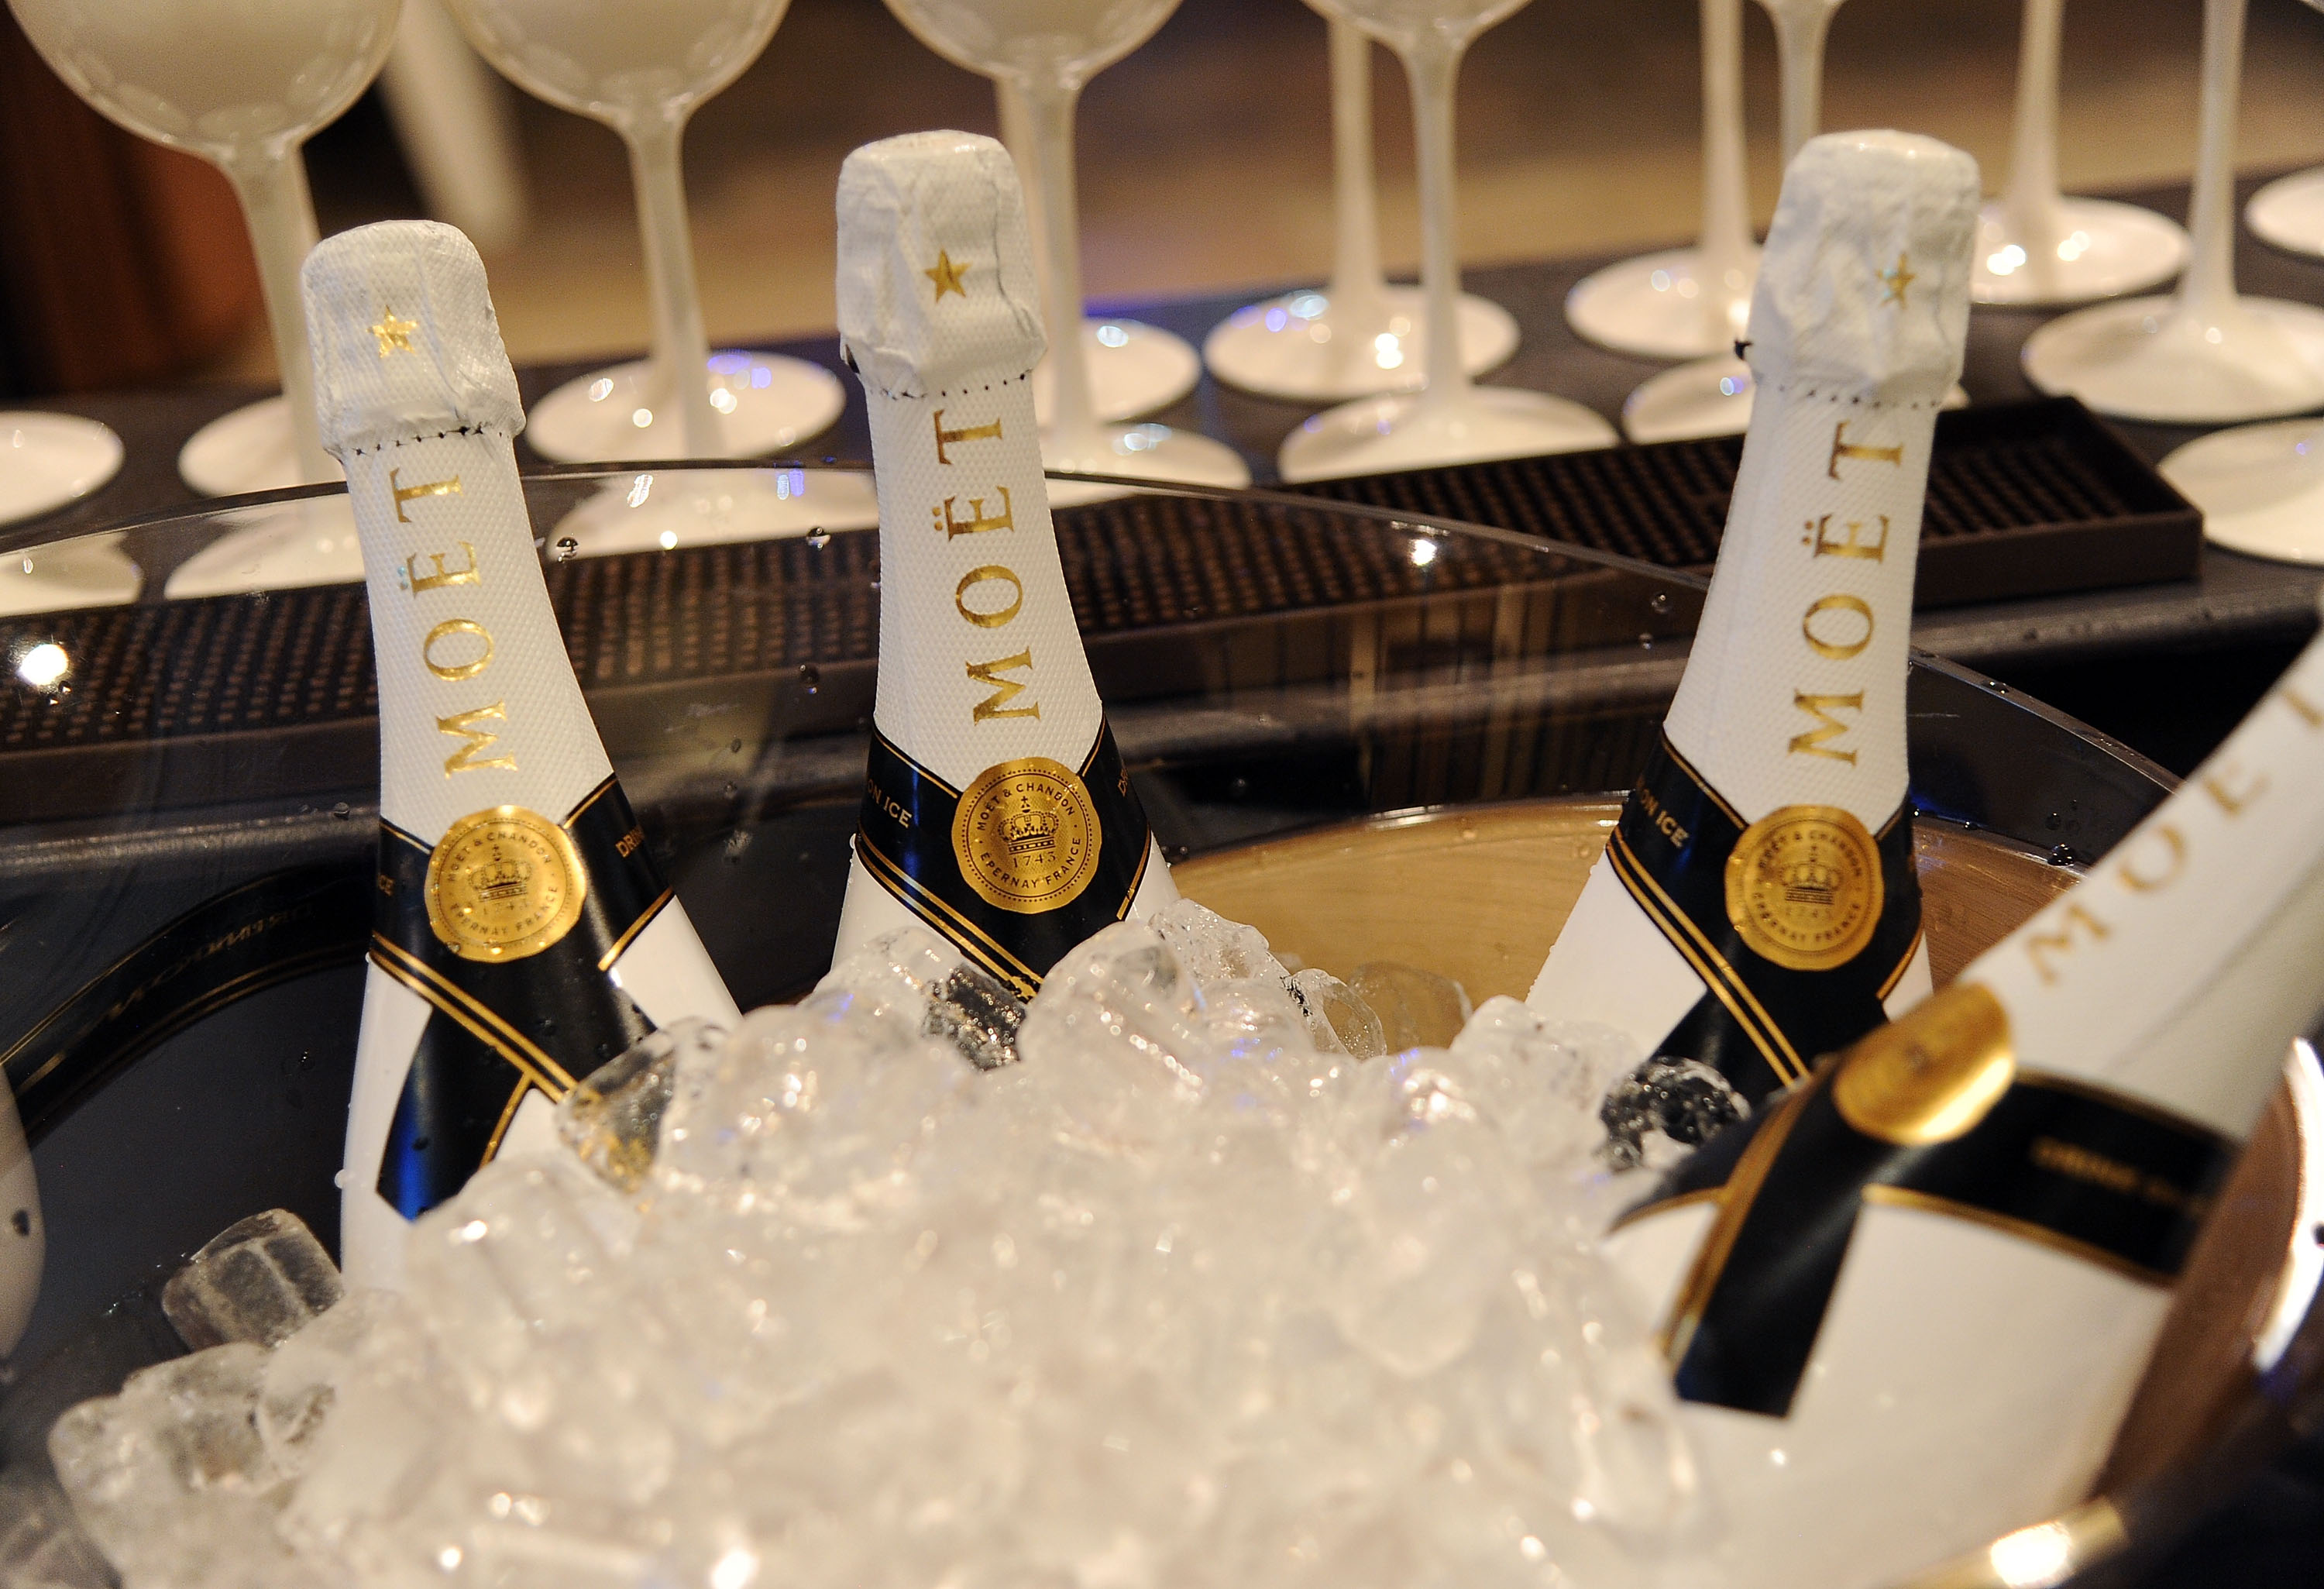 Moet Ice Imperial At Moschino's Late Night Hosted By Jeremy Scott At Coachella 2015